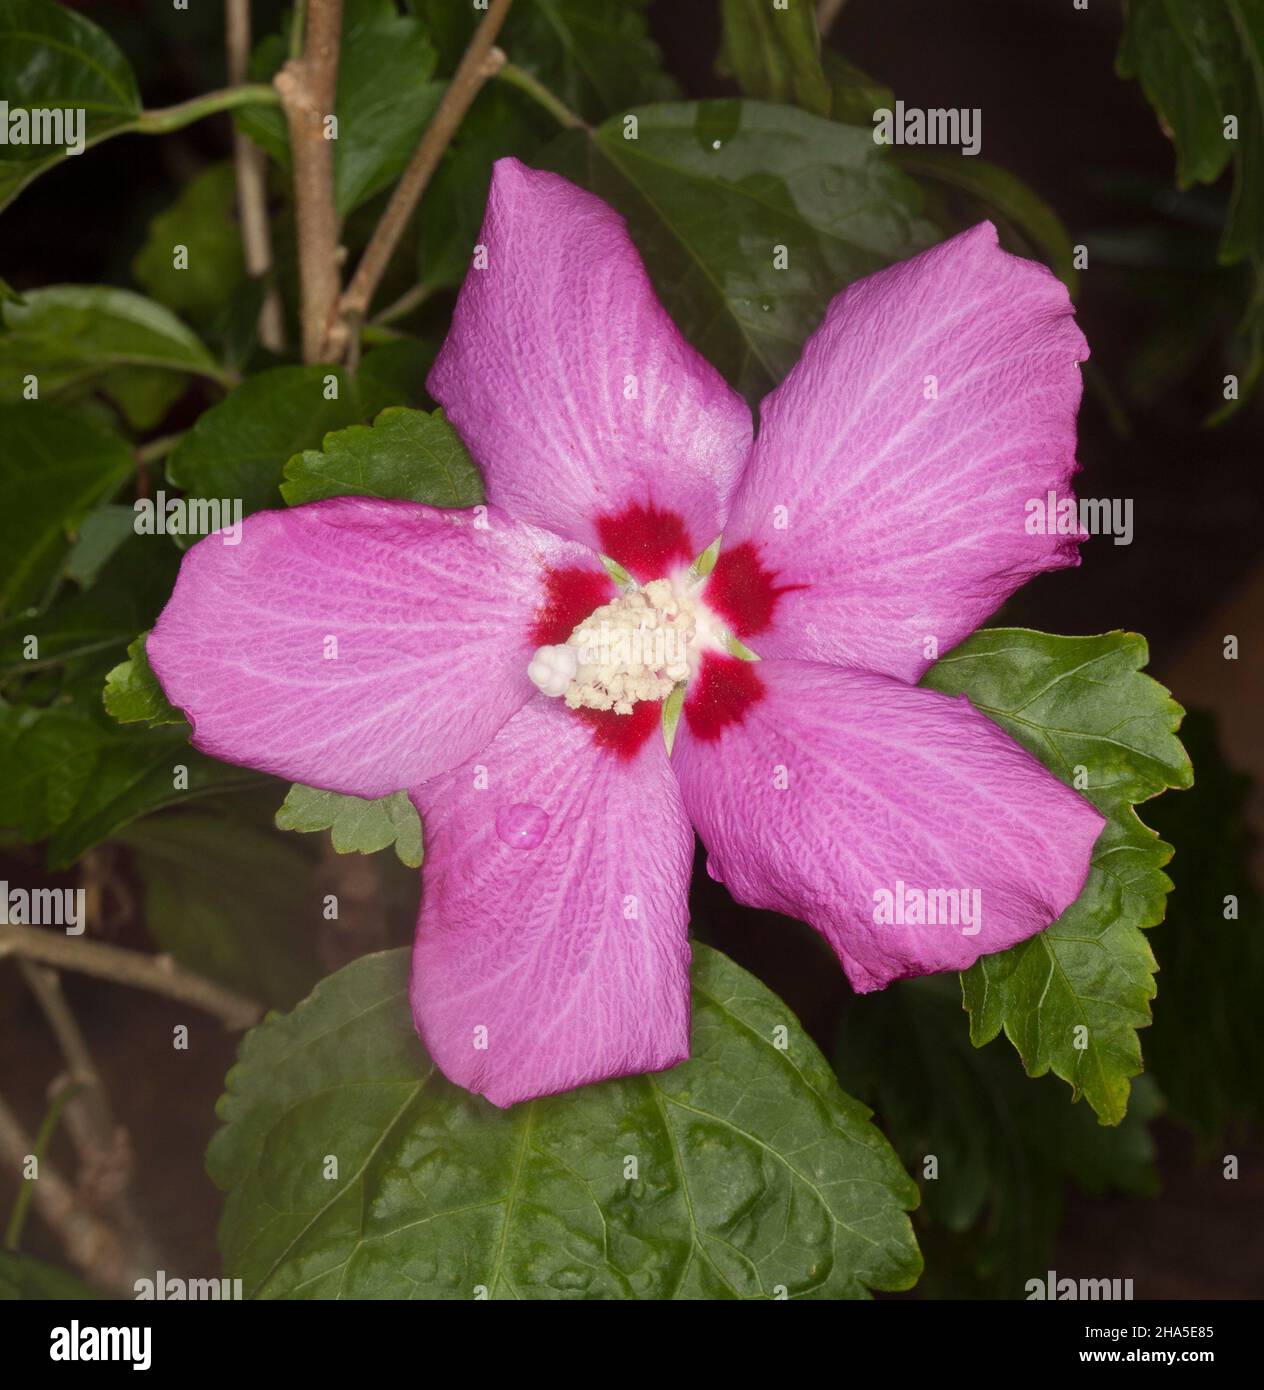 Pink flower and green leaves of Hibiscus syriacus Summer Sensations collection, a deciduous shrub Stock Photo